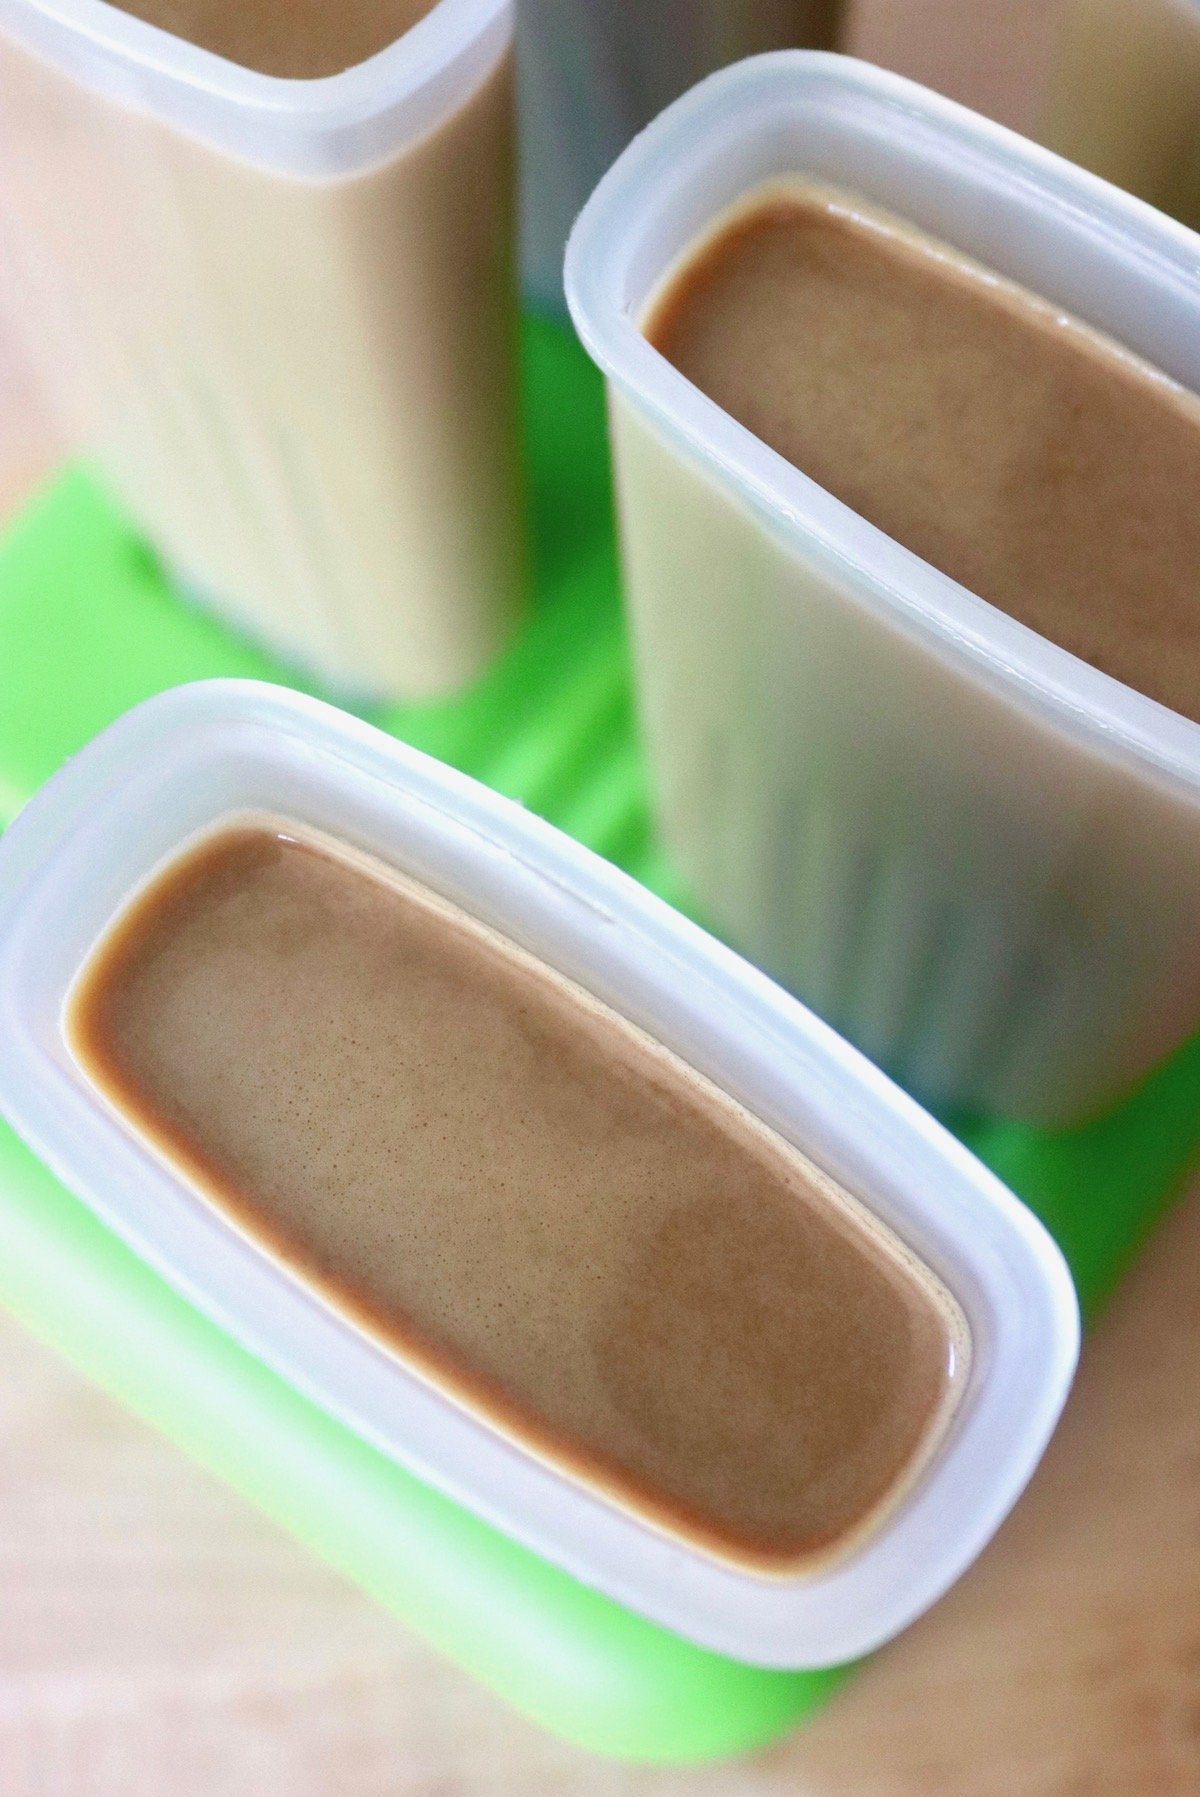 Popsicles molds fill with creamy coffee mixture.